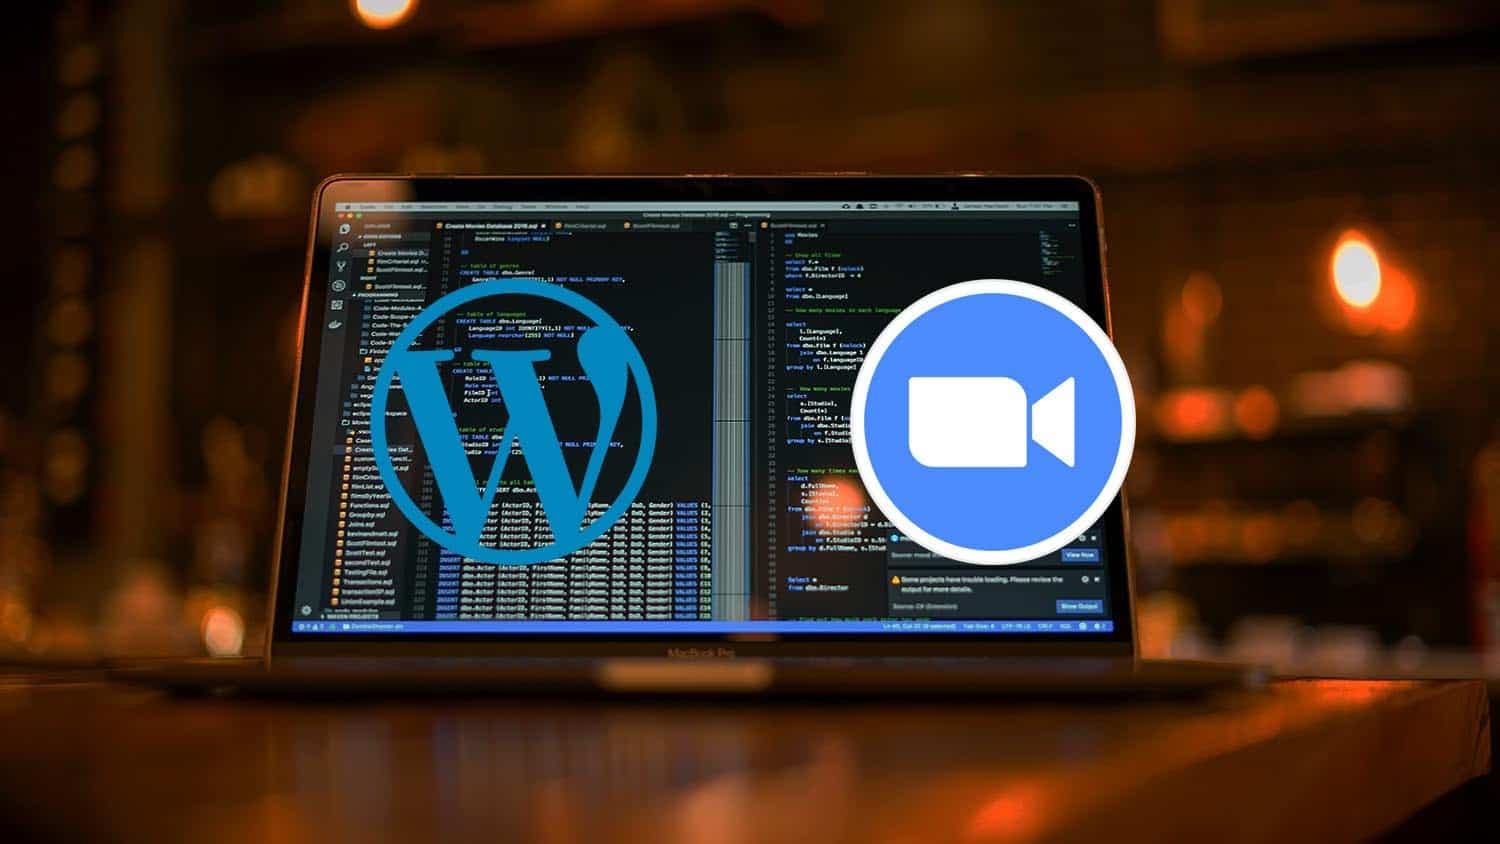 How to automate importing zoom webinars into Wordpress